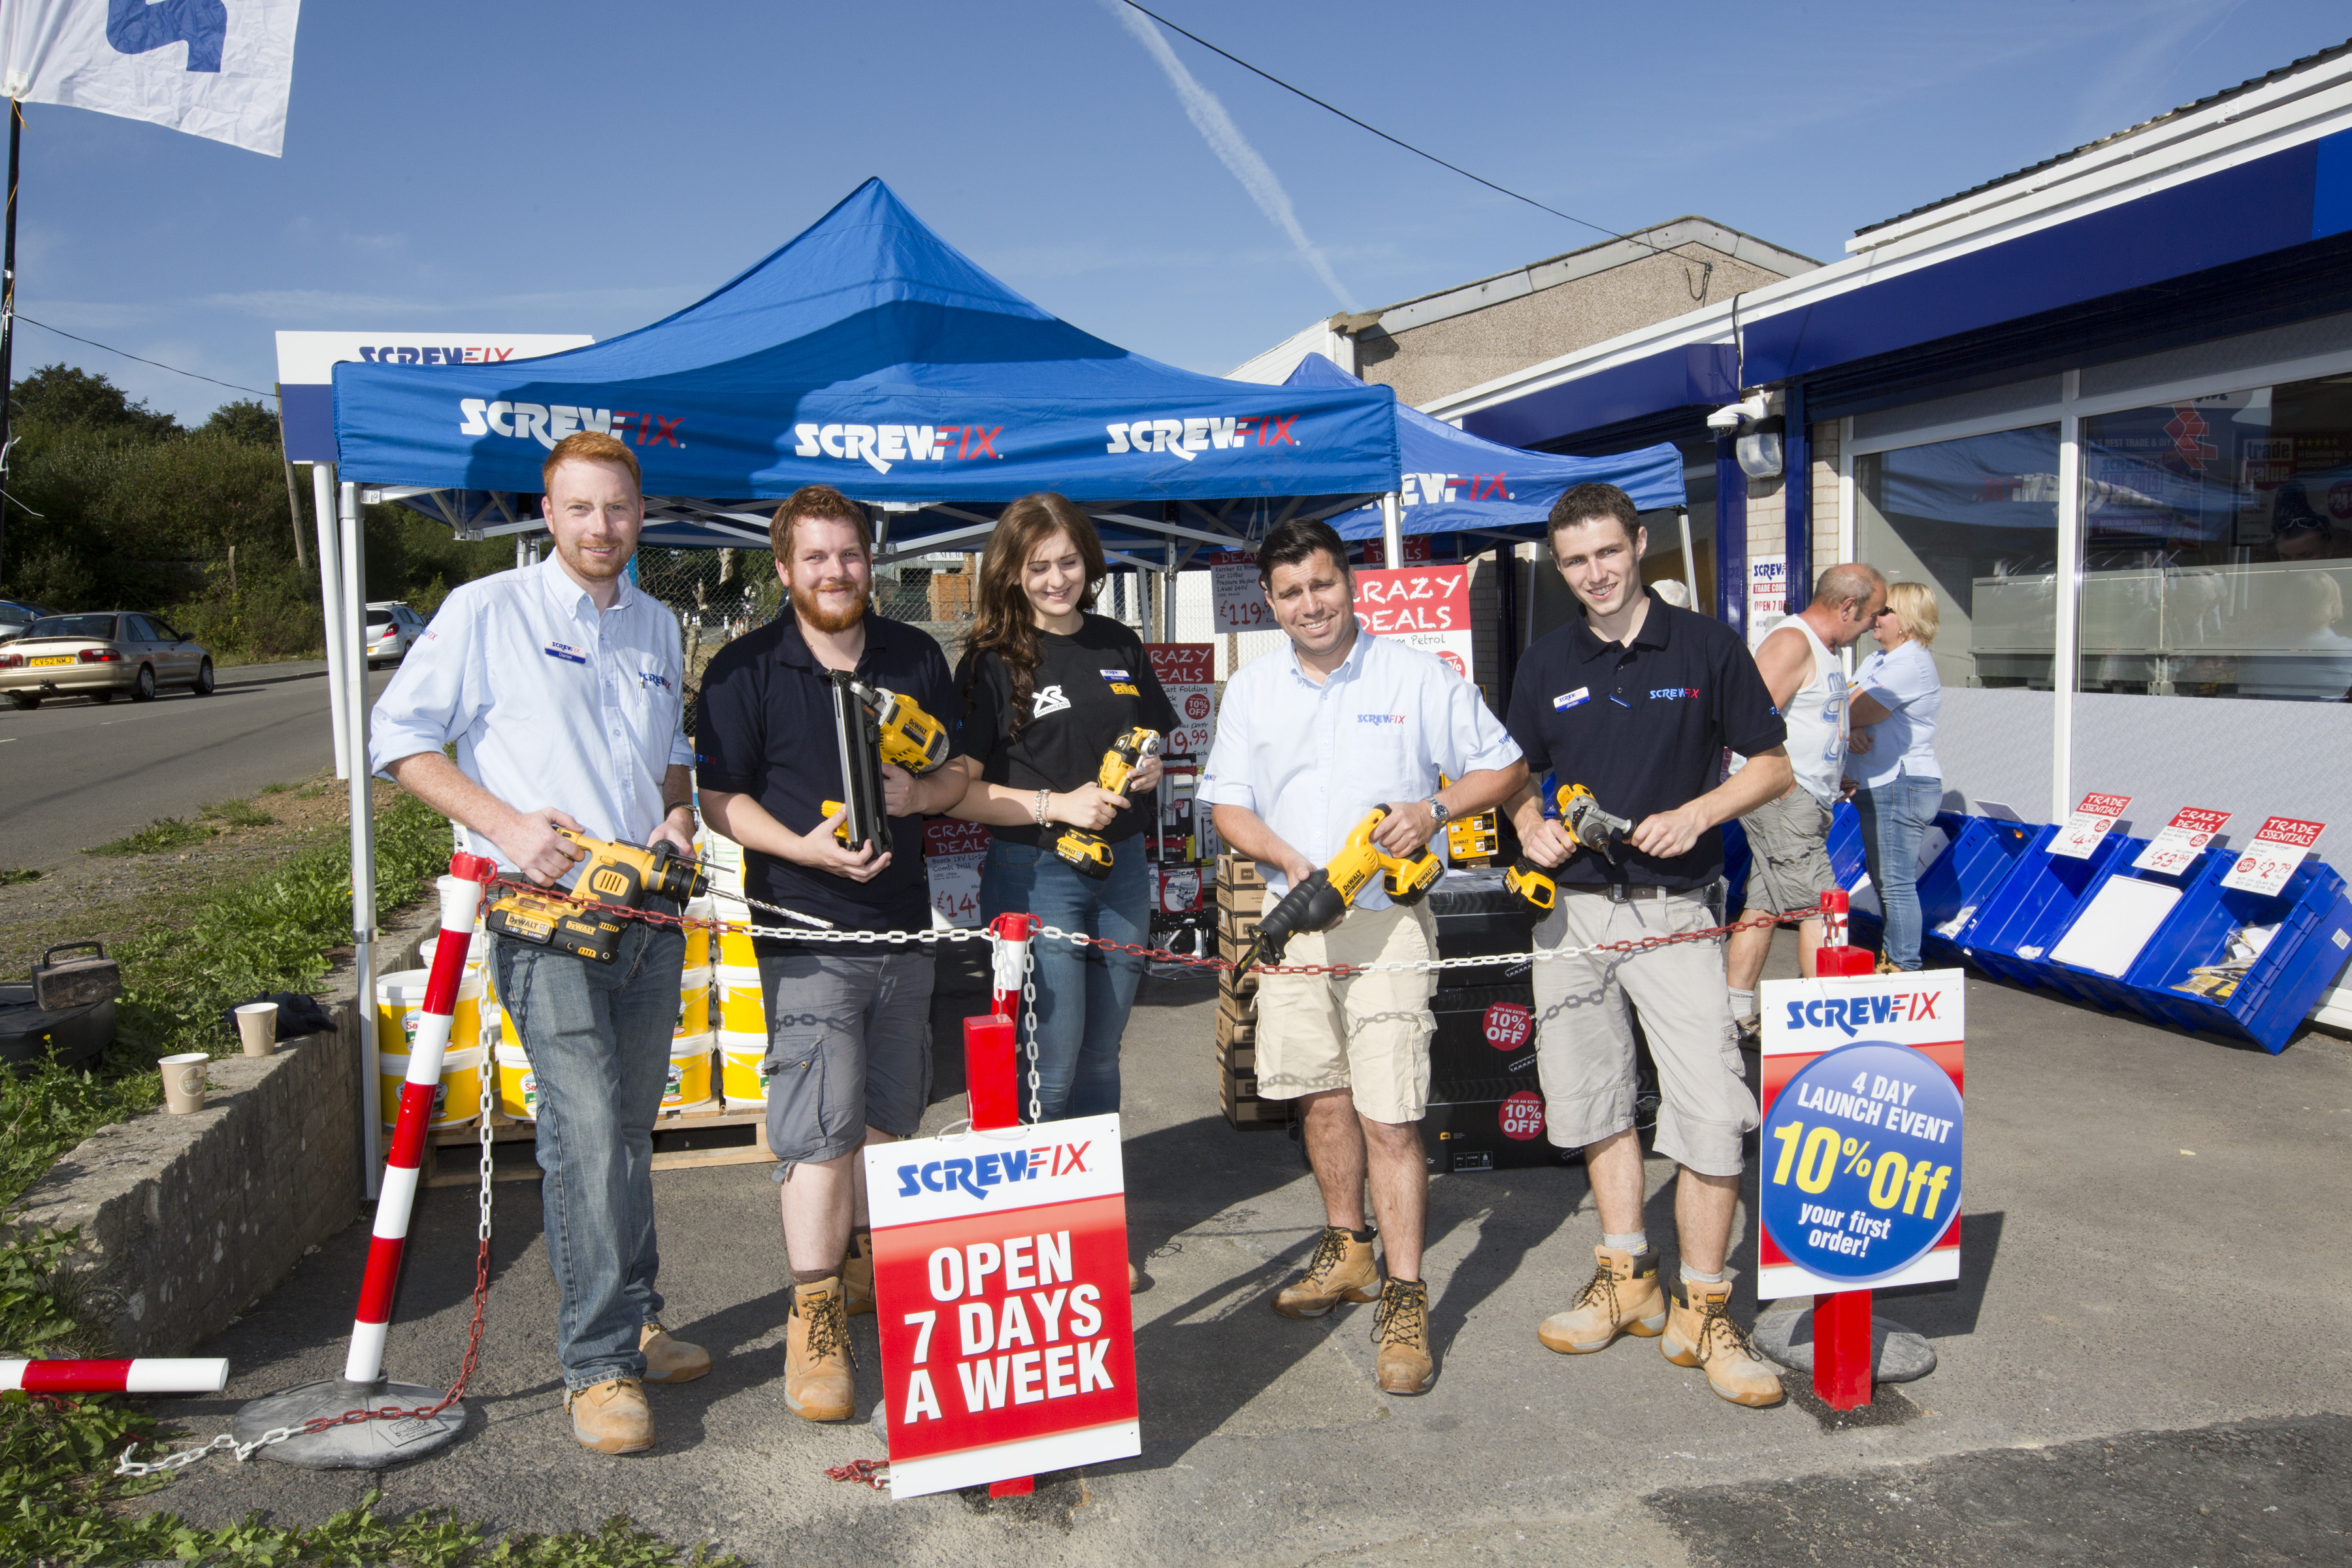 Haverfordwest’s first Screwfix store is declared a runaway success